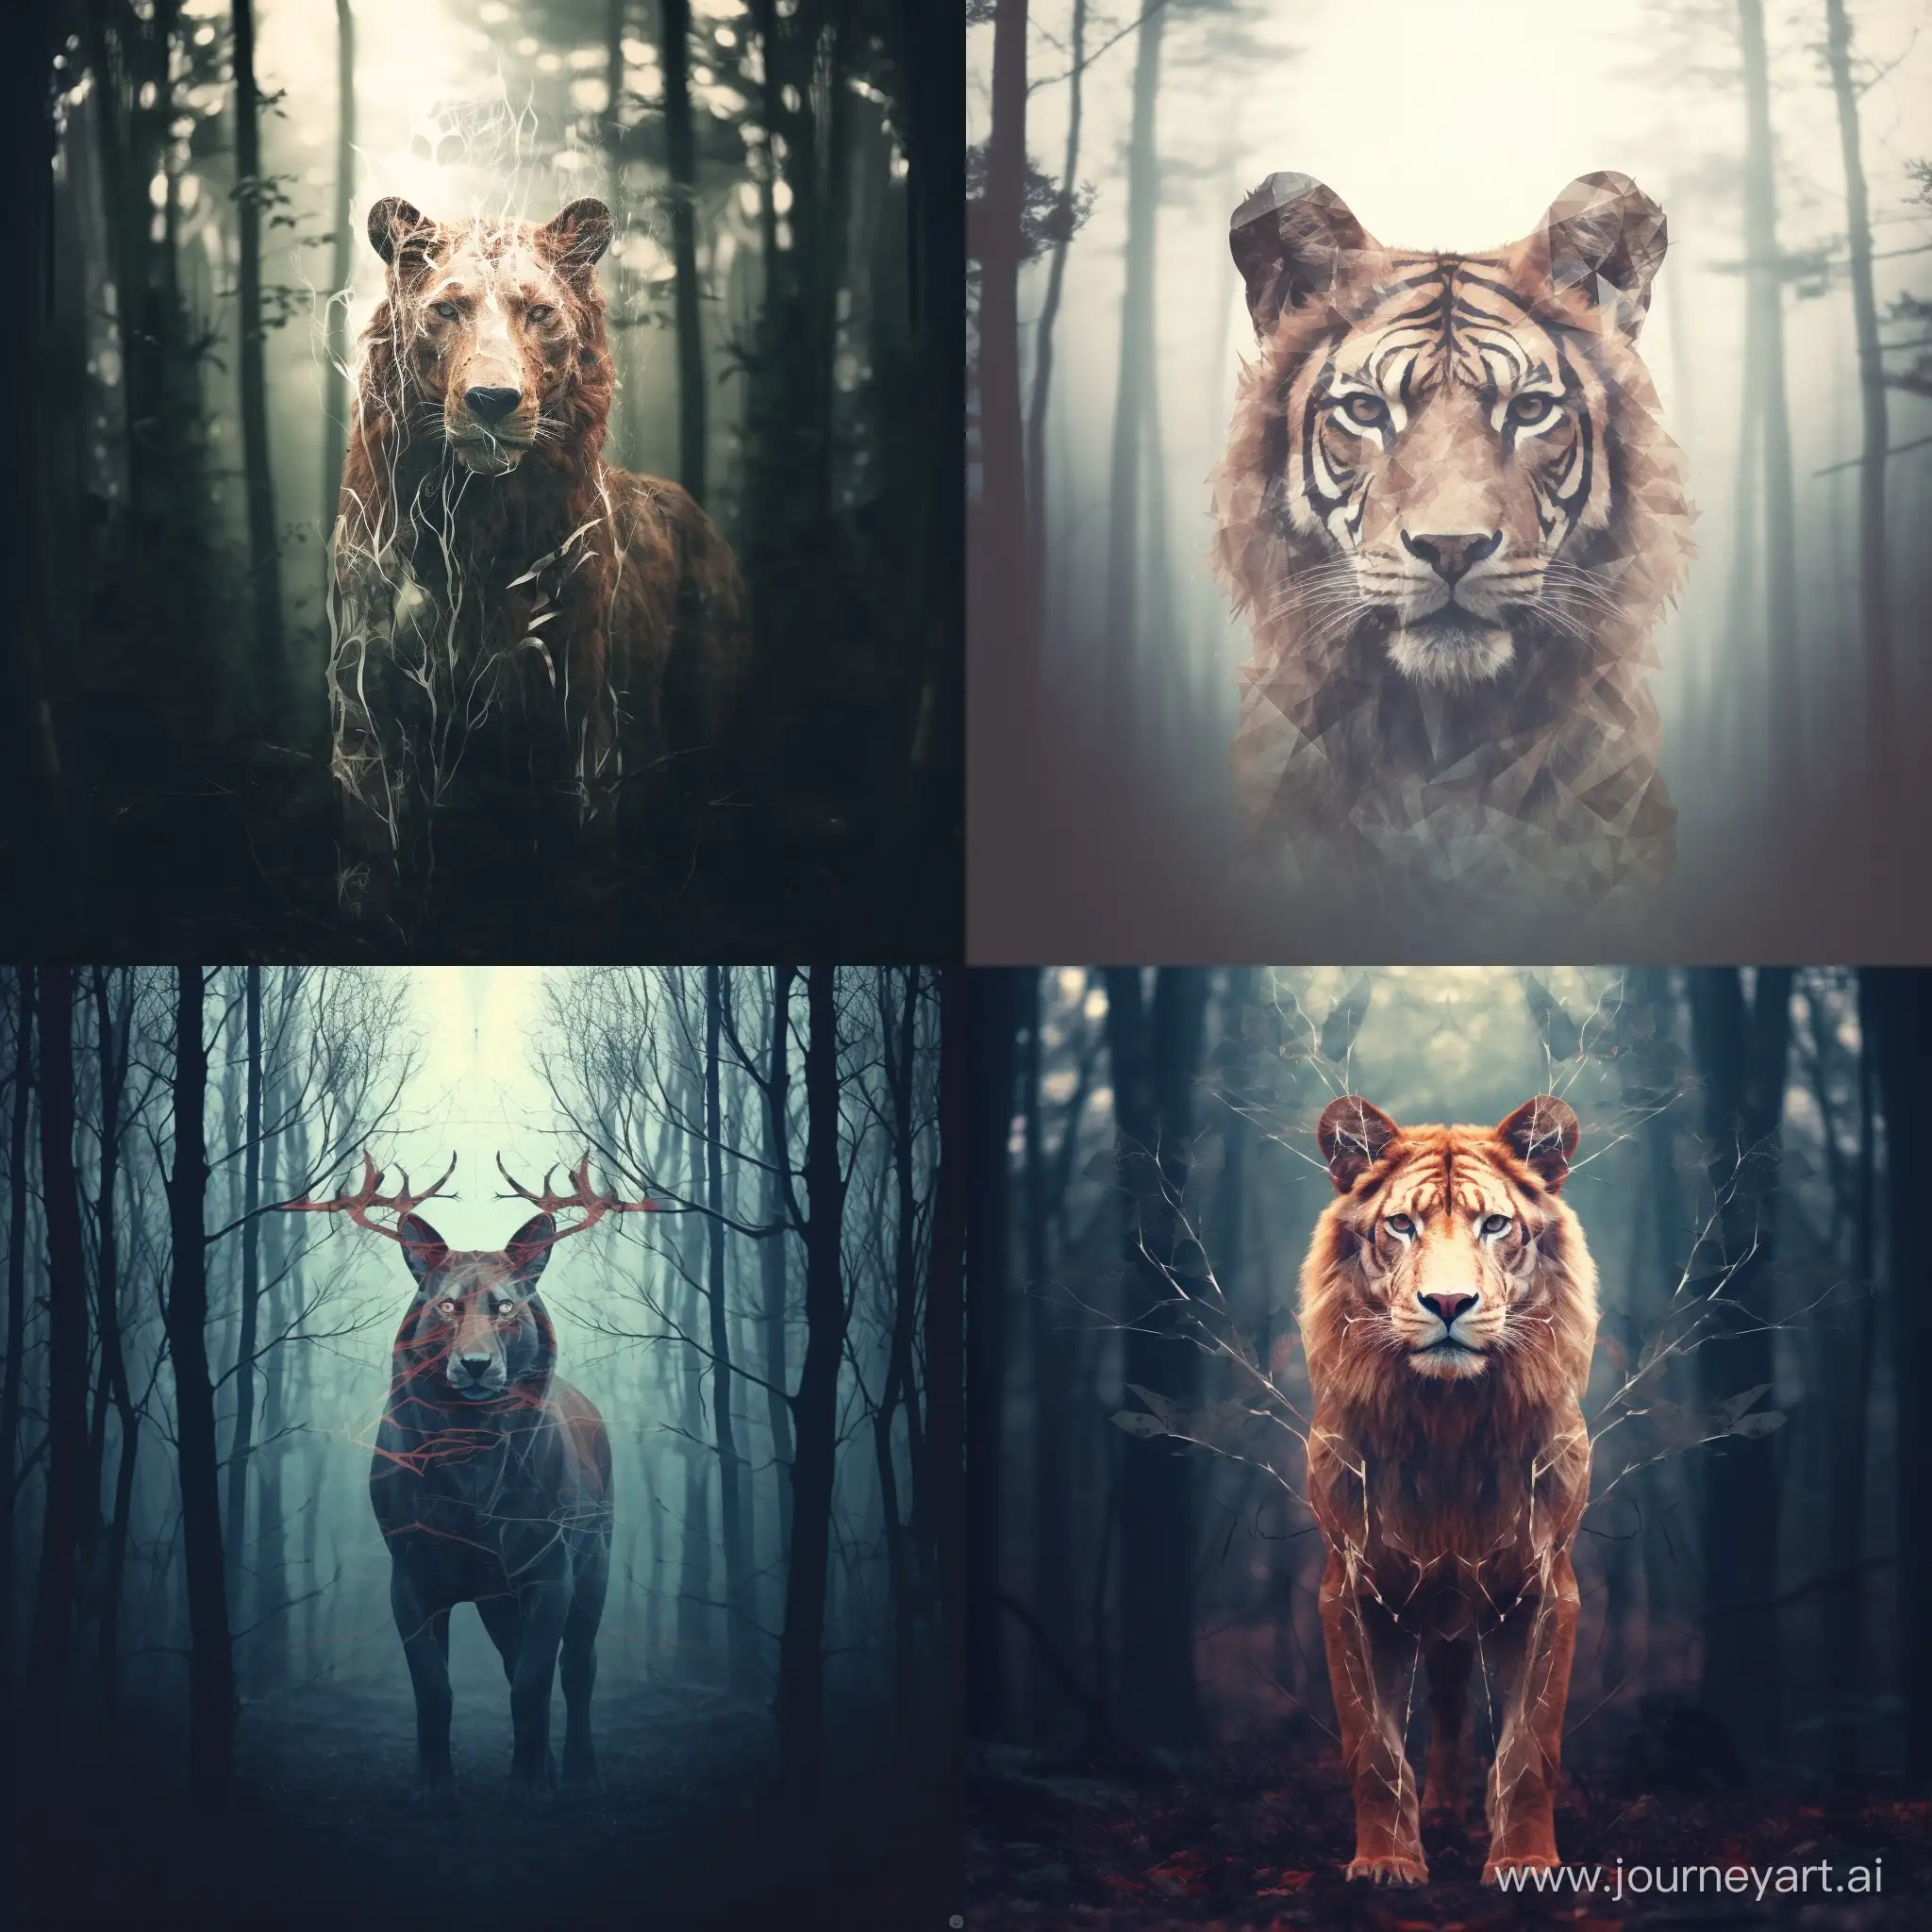 Majestic-Tiger-and-Serene-Deer-Double-Exposure-in-Enchanting-Forest